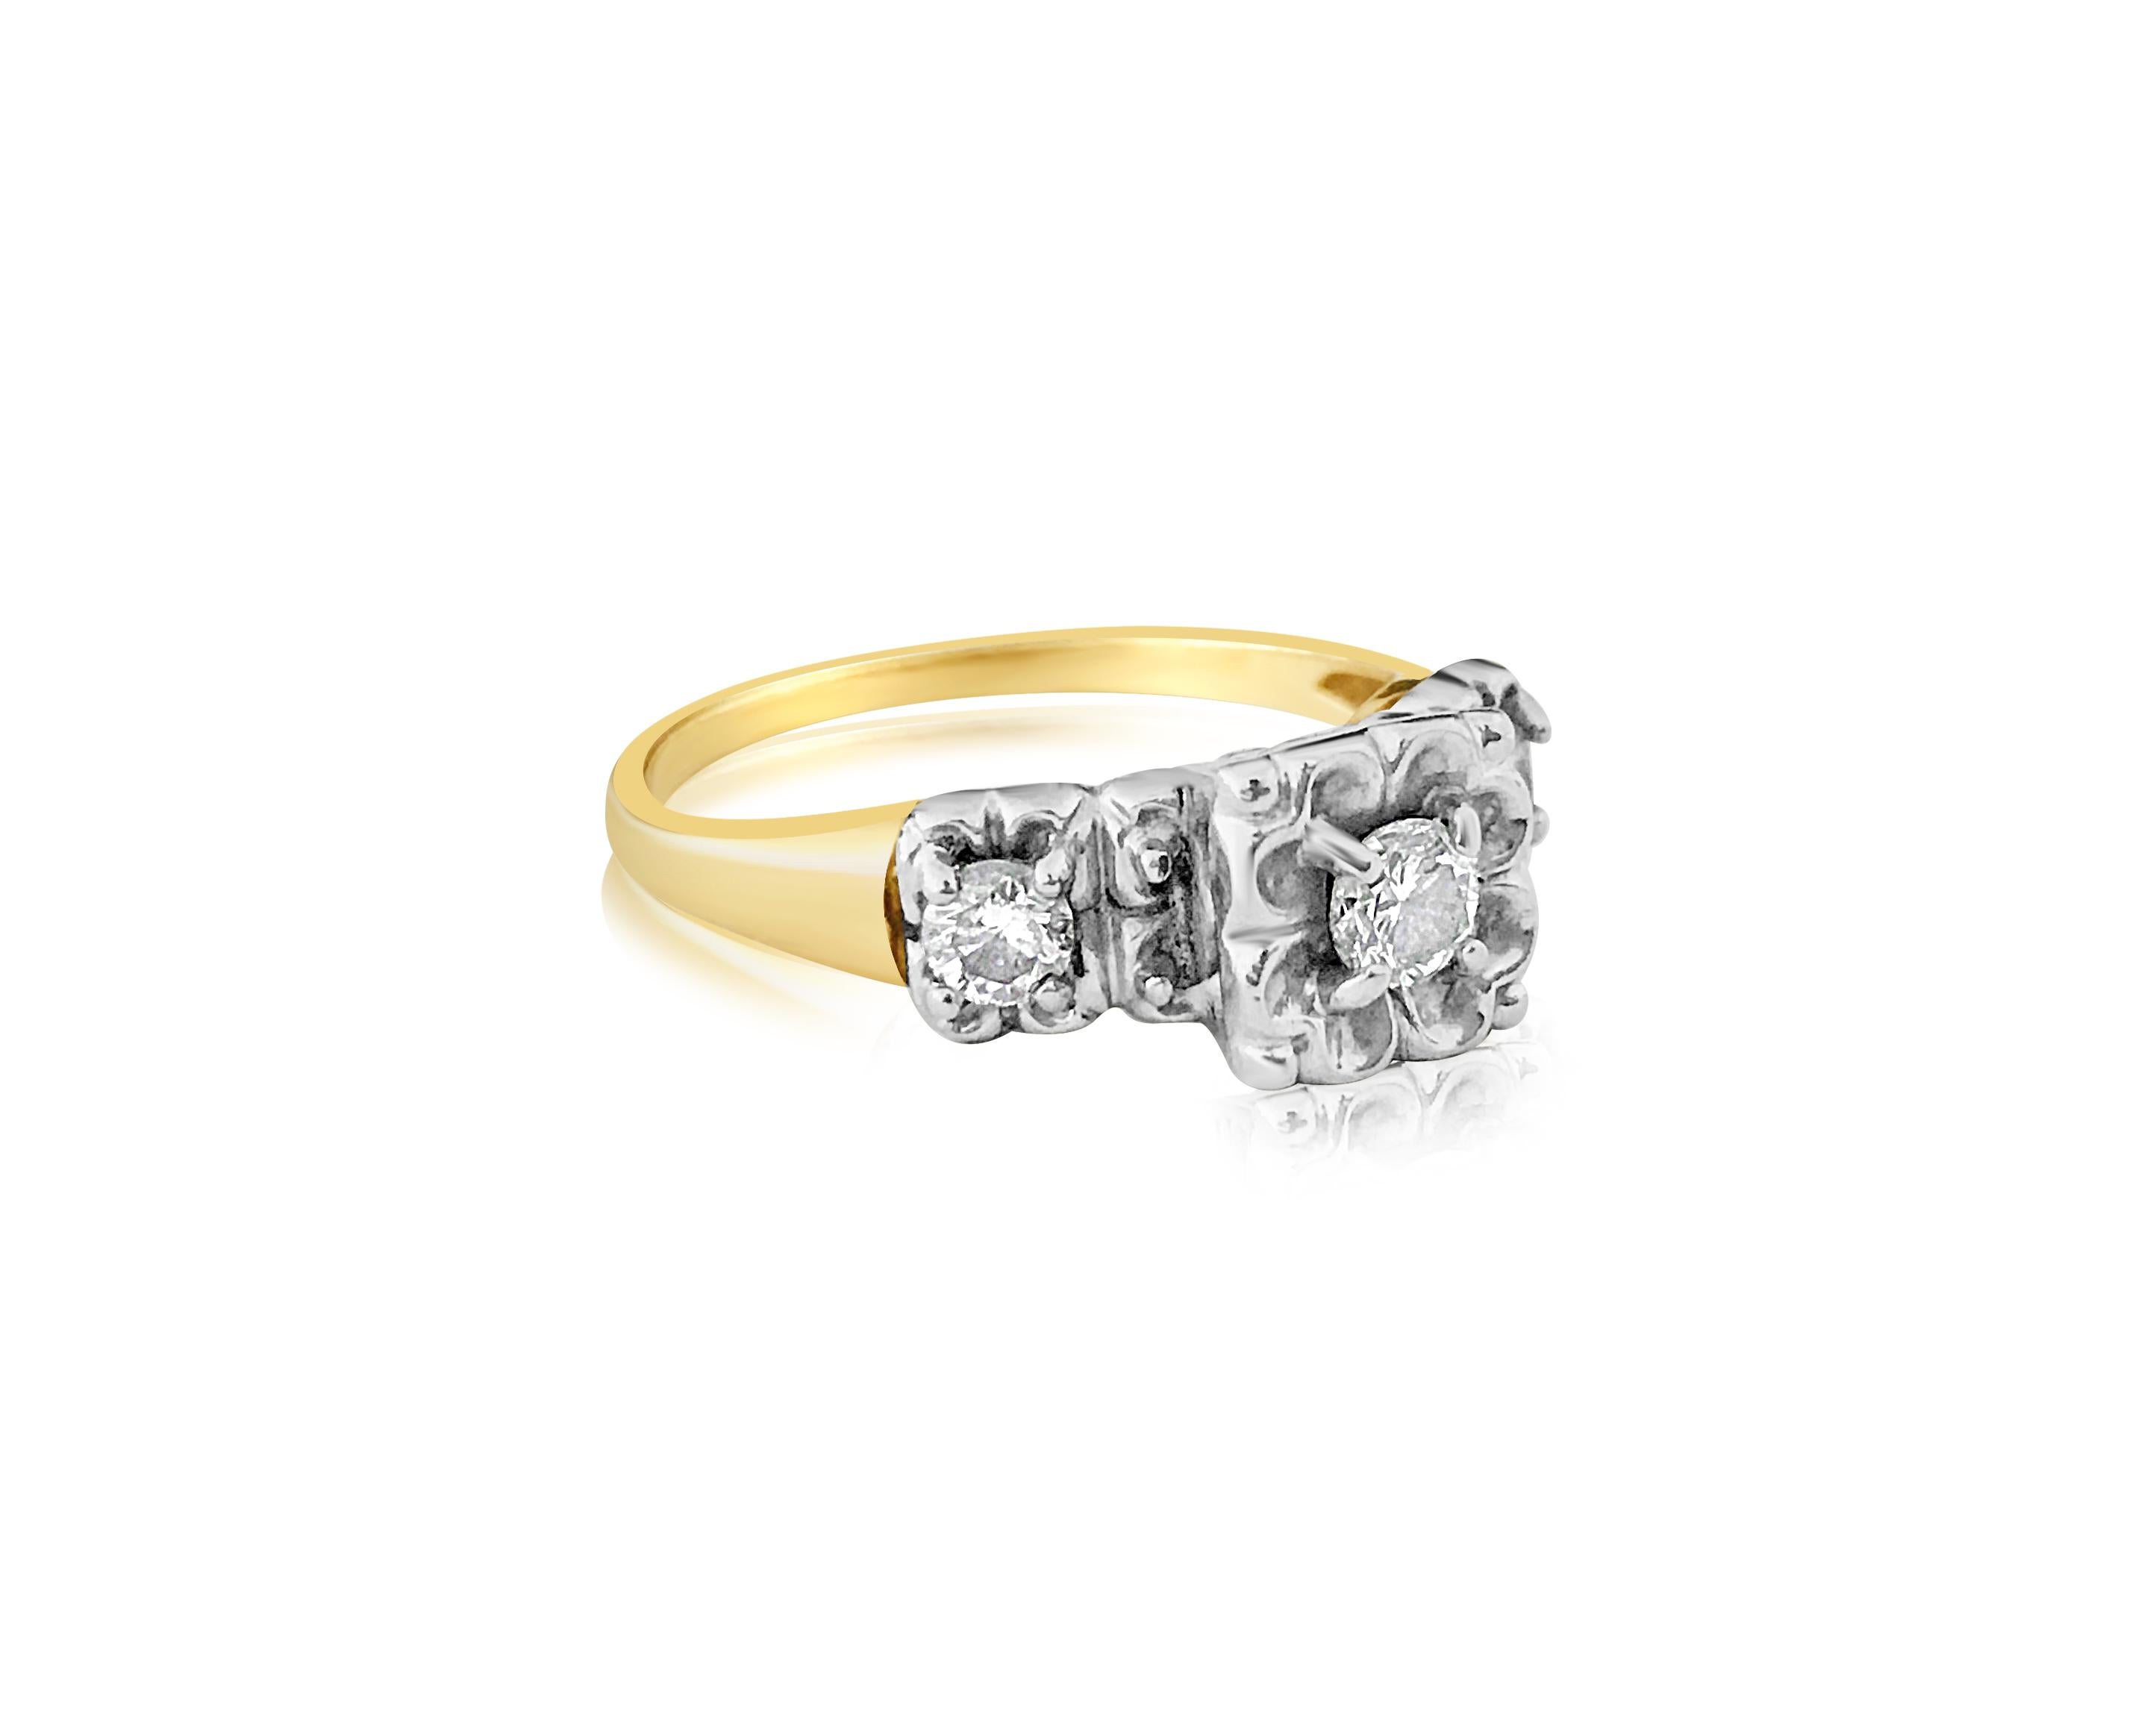 Fashioned from lustrous 14k yellow gold, this contemporary ring boasts a total of 0.73 carats of dazzling diamonds. These diamonds exhibit VS clarity and F color, ensuring brilliance and sparkle. Each diamond is 100% natural and earth mined, adding